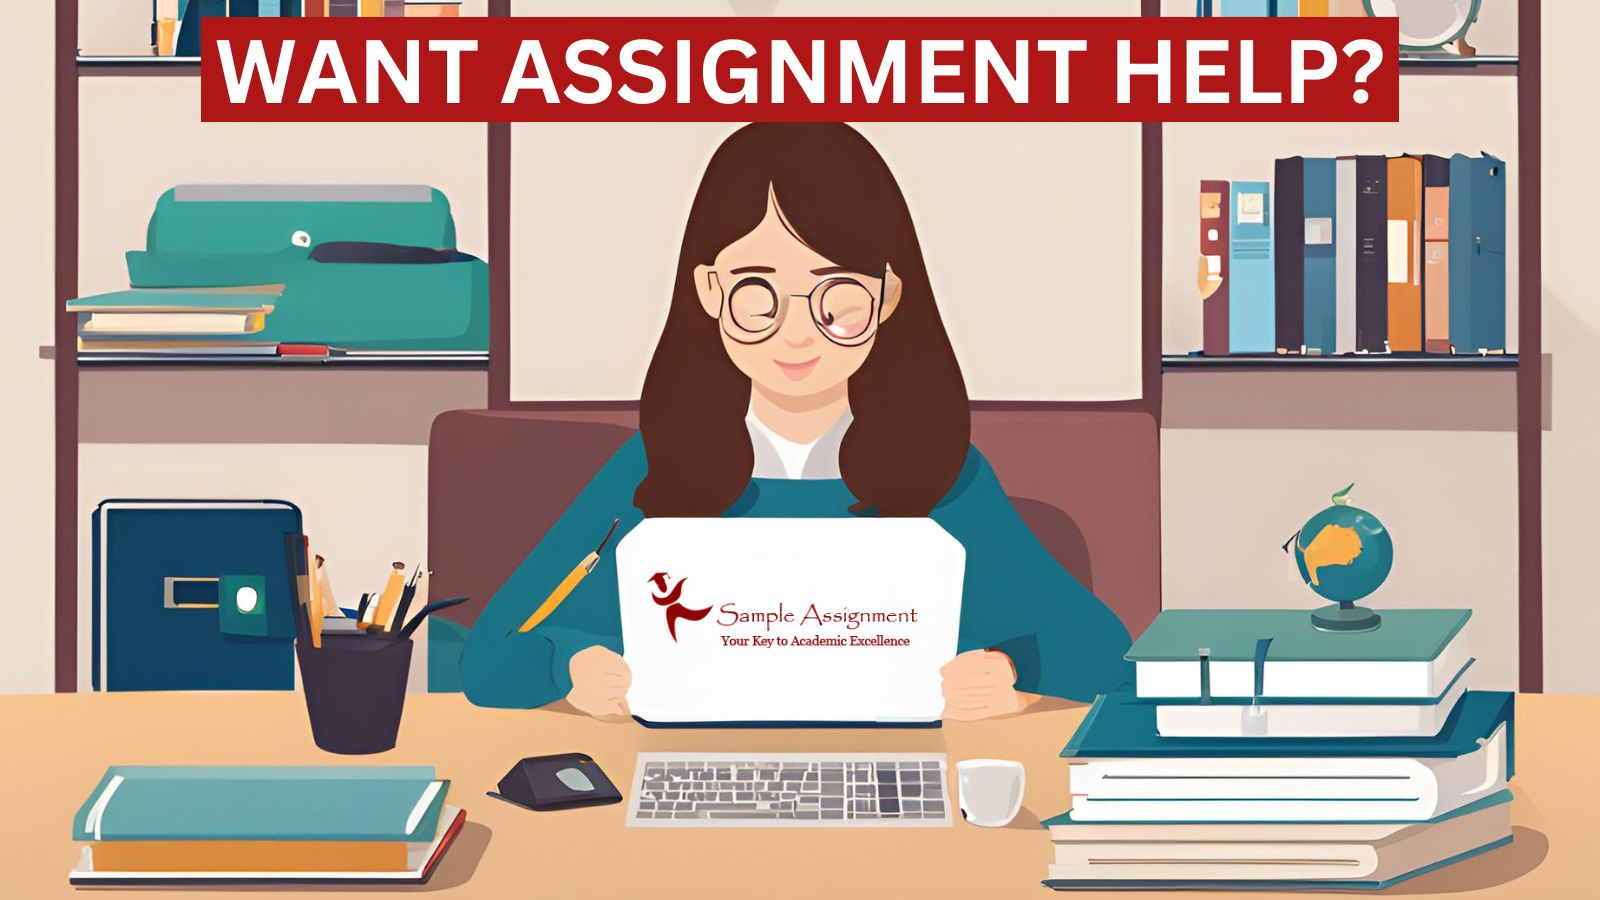 # No. 1 Affordable Assignment Help Options in Townsville - ViralSocialTrends